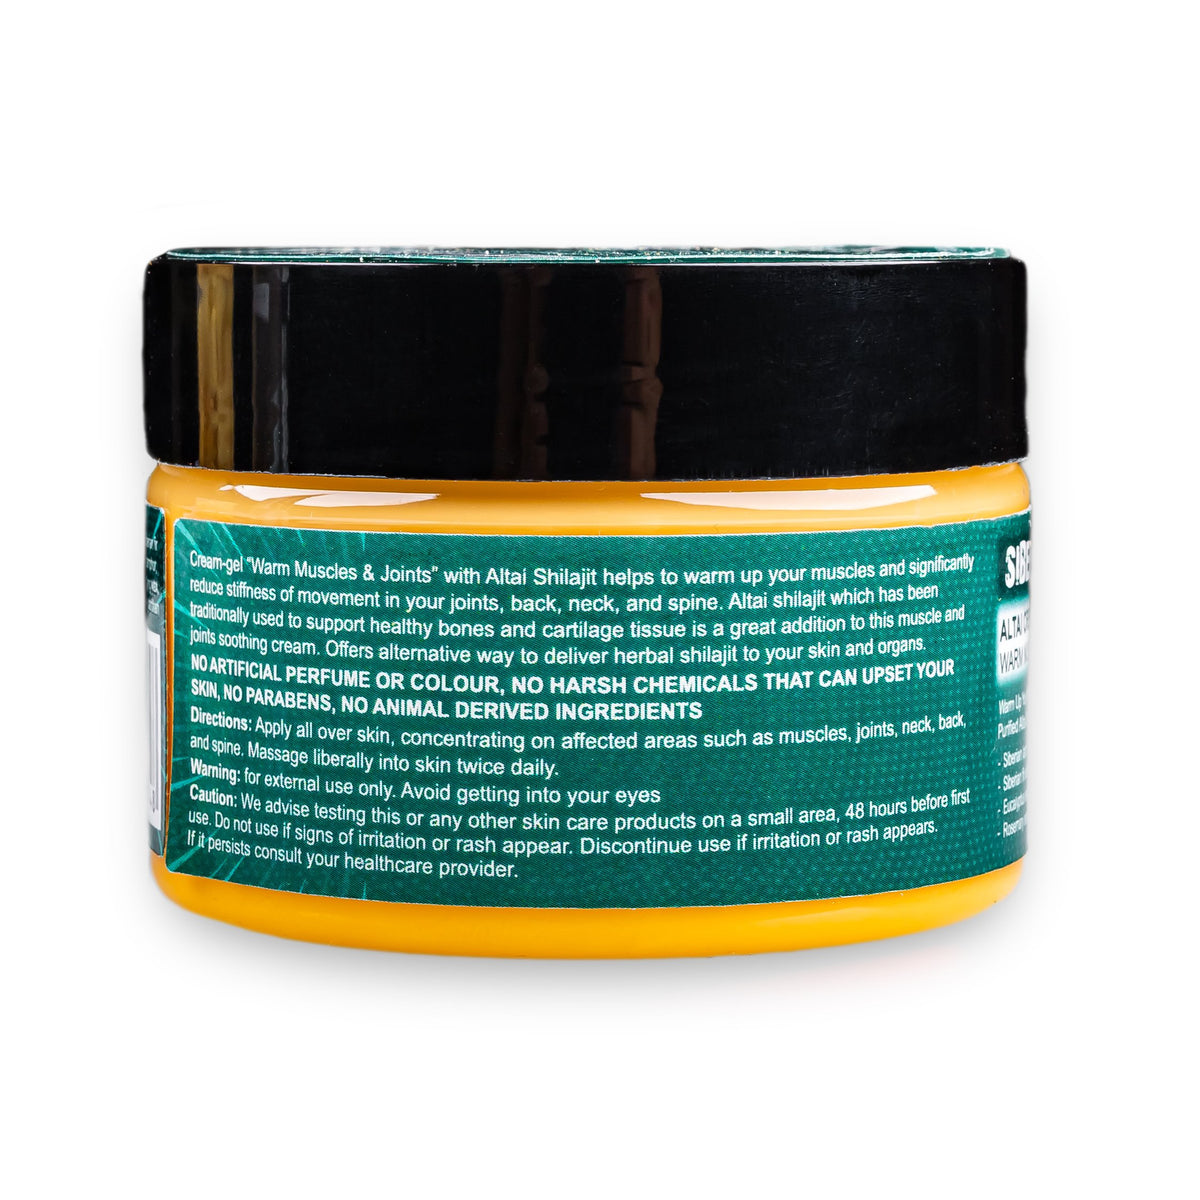 Altai Cream-Gel “Warm Muscles &amp; Joints” with Shilajit Pine Nut Essential Oils Resin and Herbs